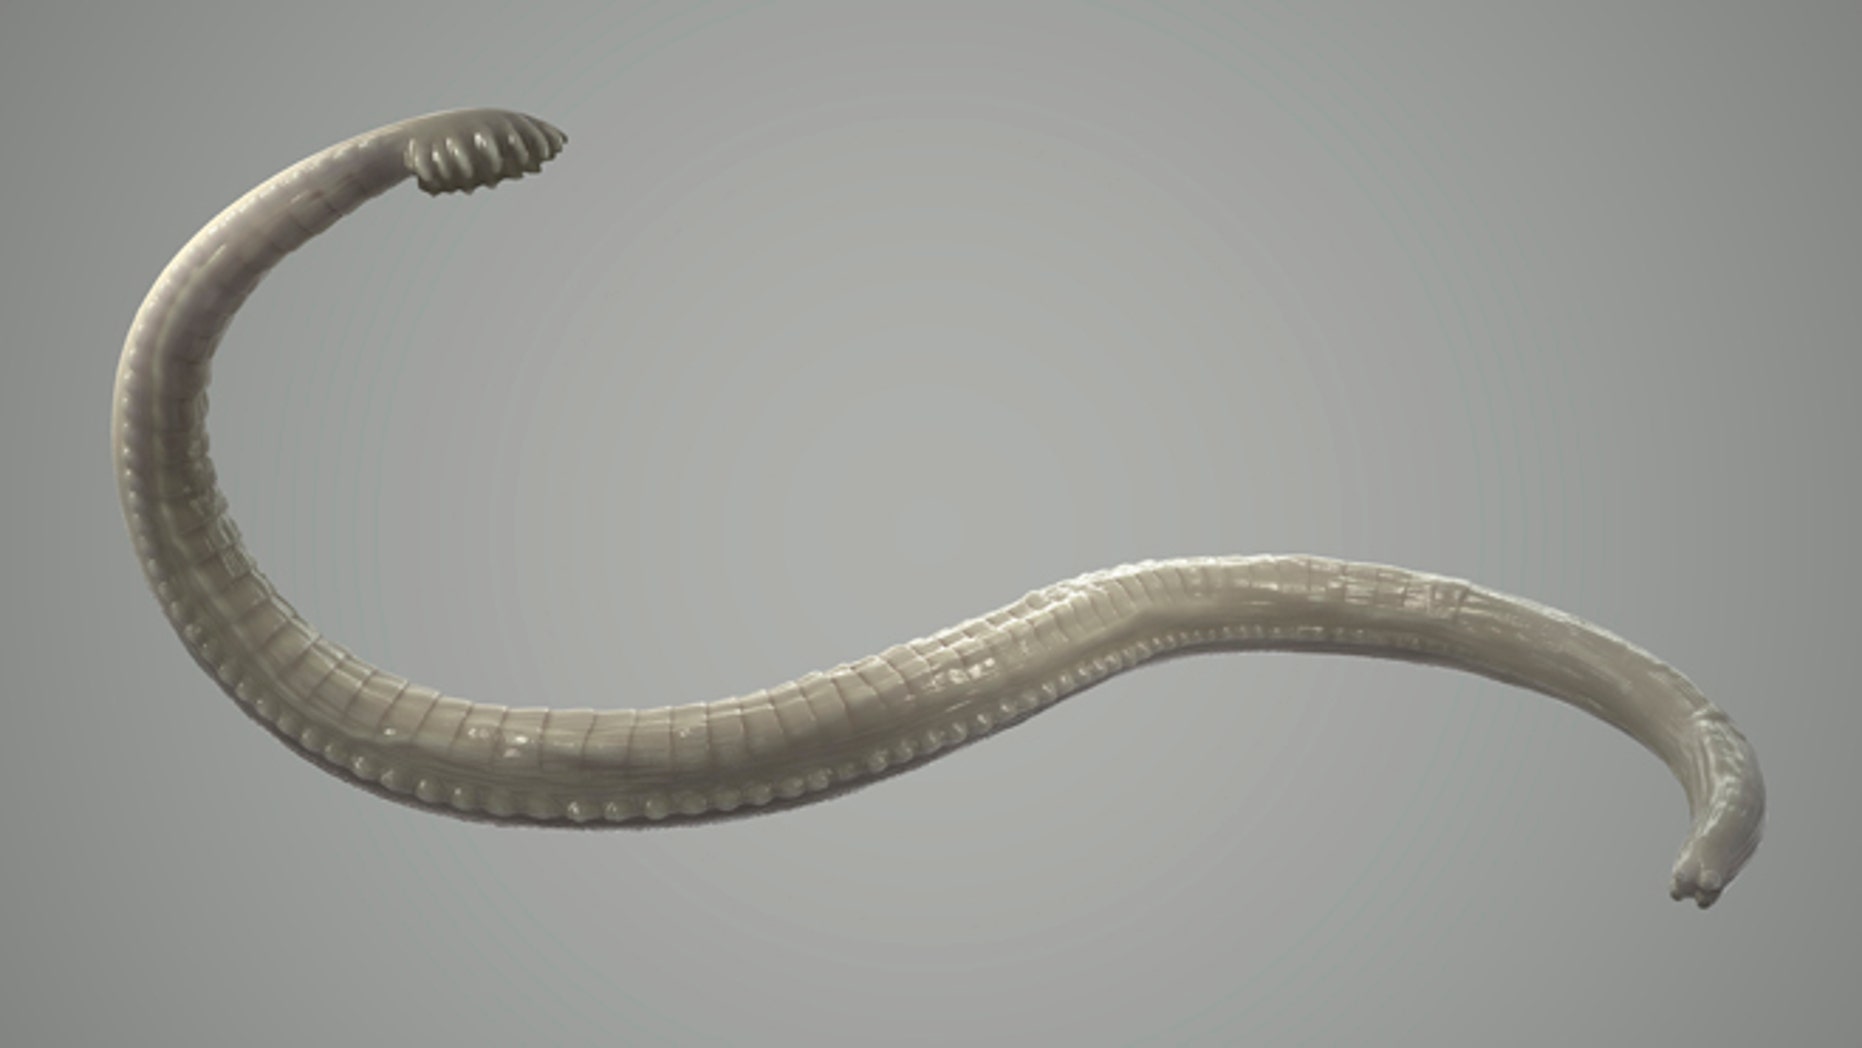 A tapeworm is a parasite that you can get if you eat the infected and undercooked meat of an animal.